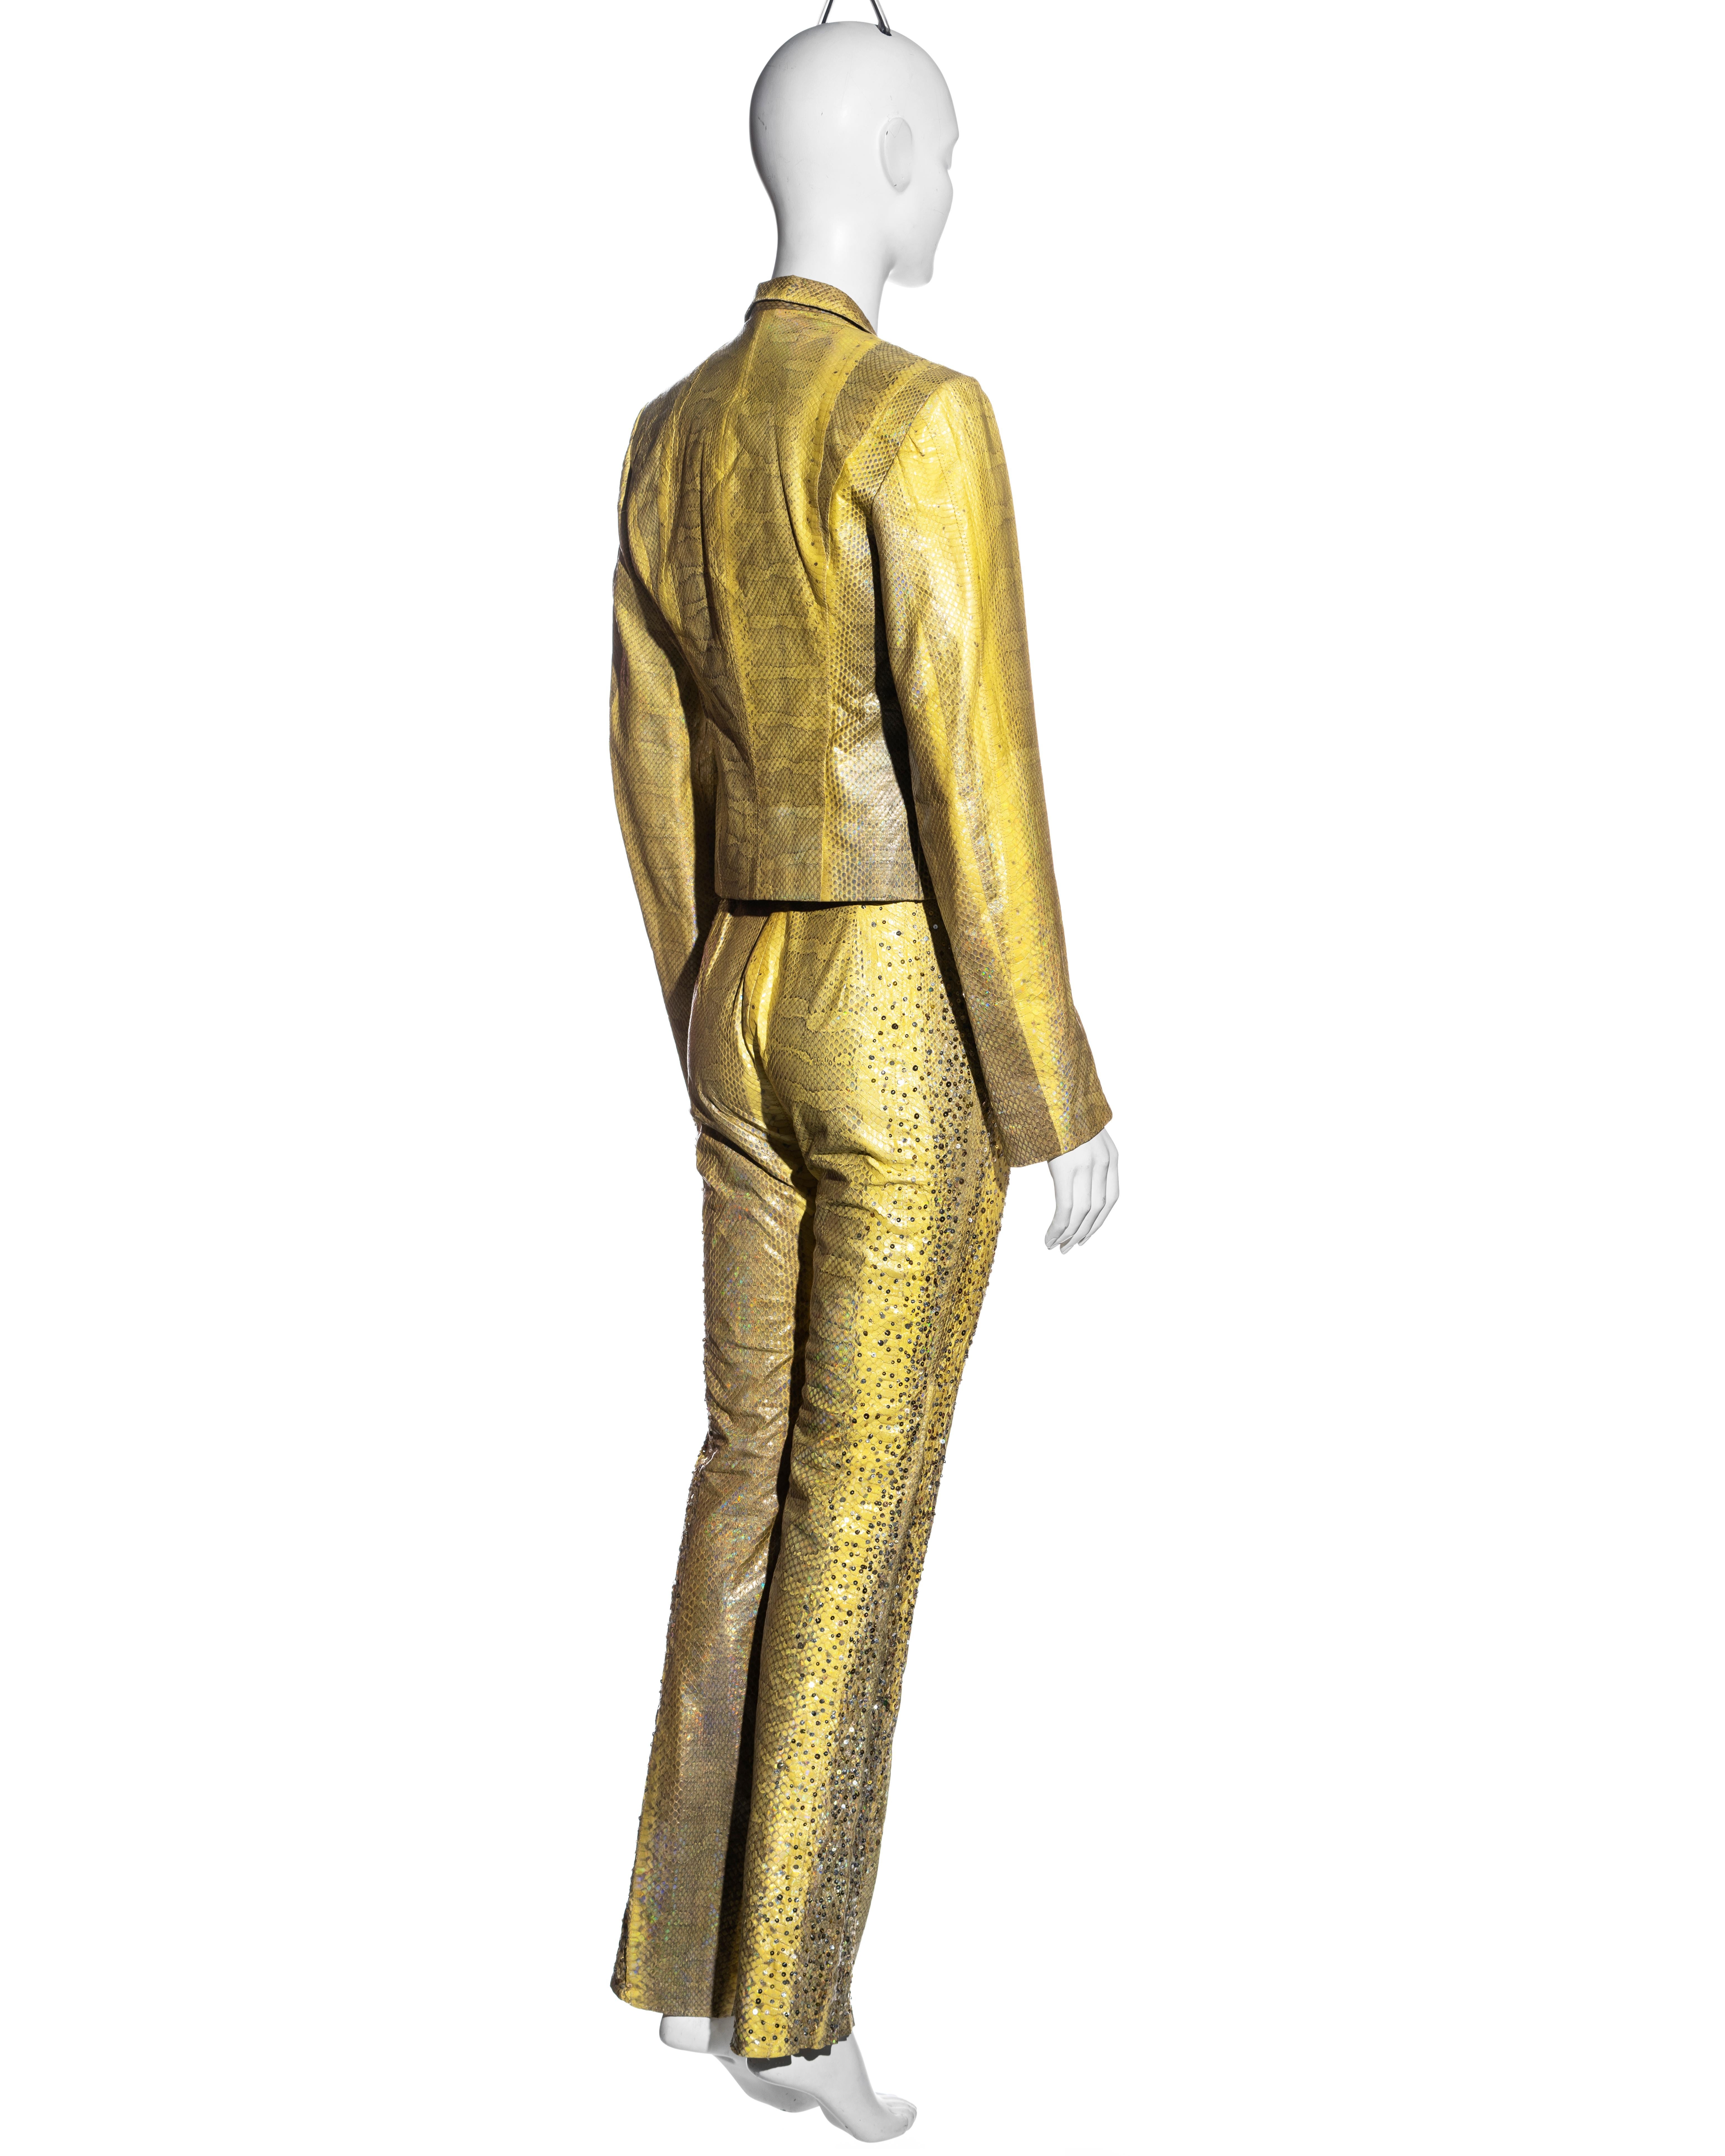 Roberto Cavalli yellow iridescent snakeskin pant suit with sequins, ss 2001 For Sale 4